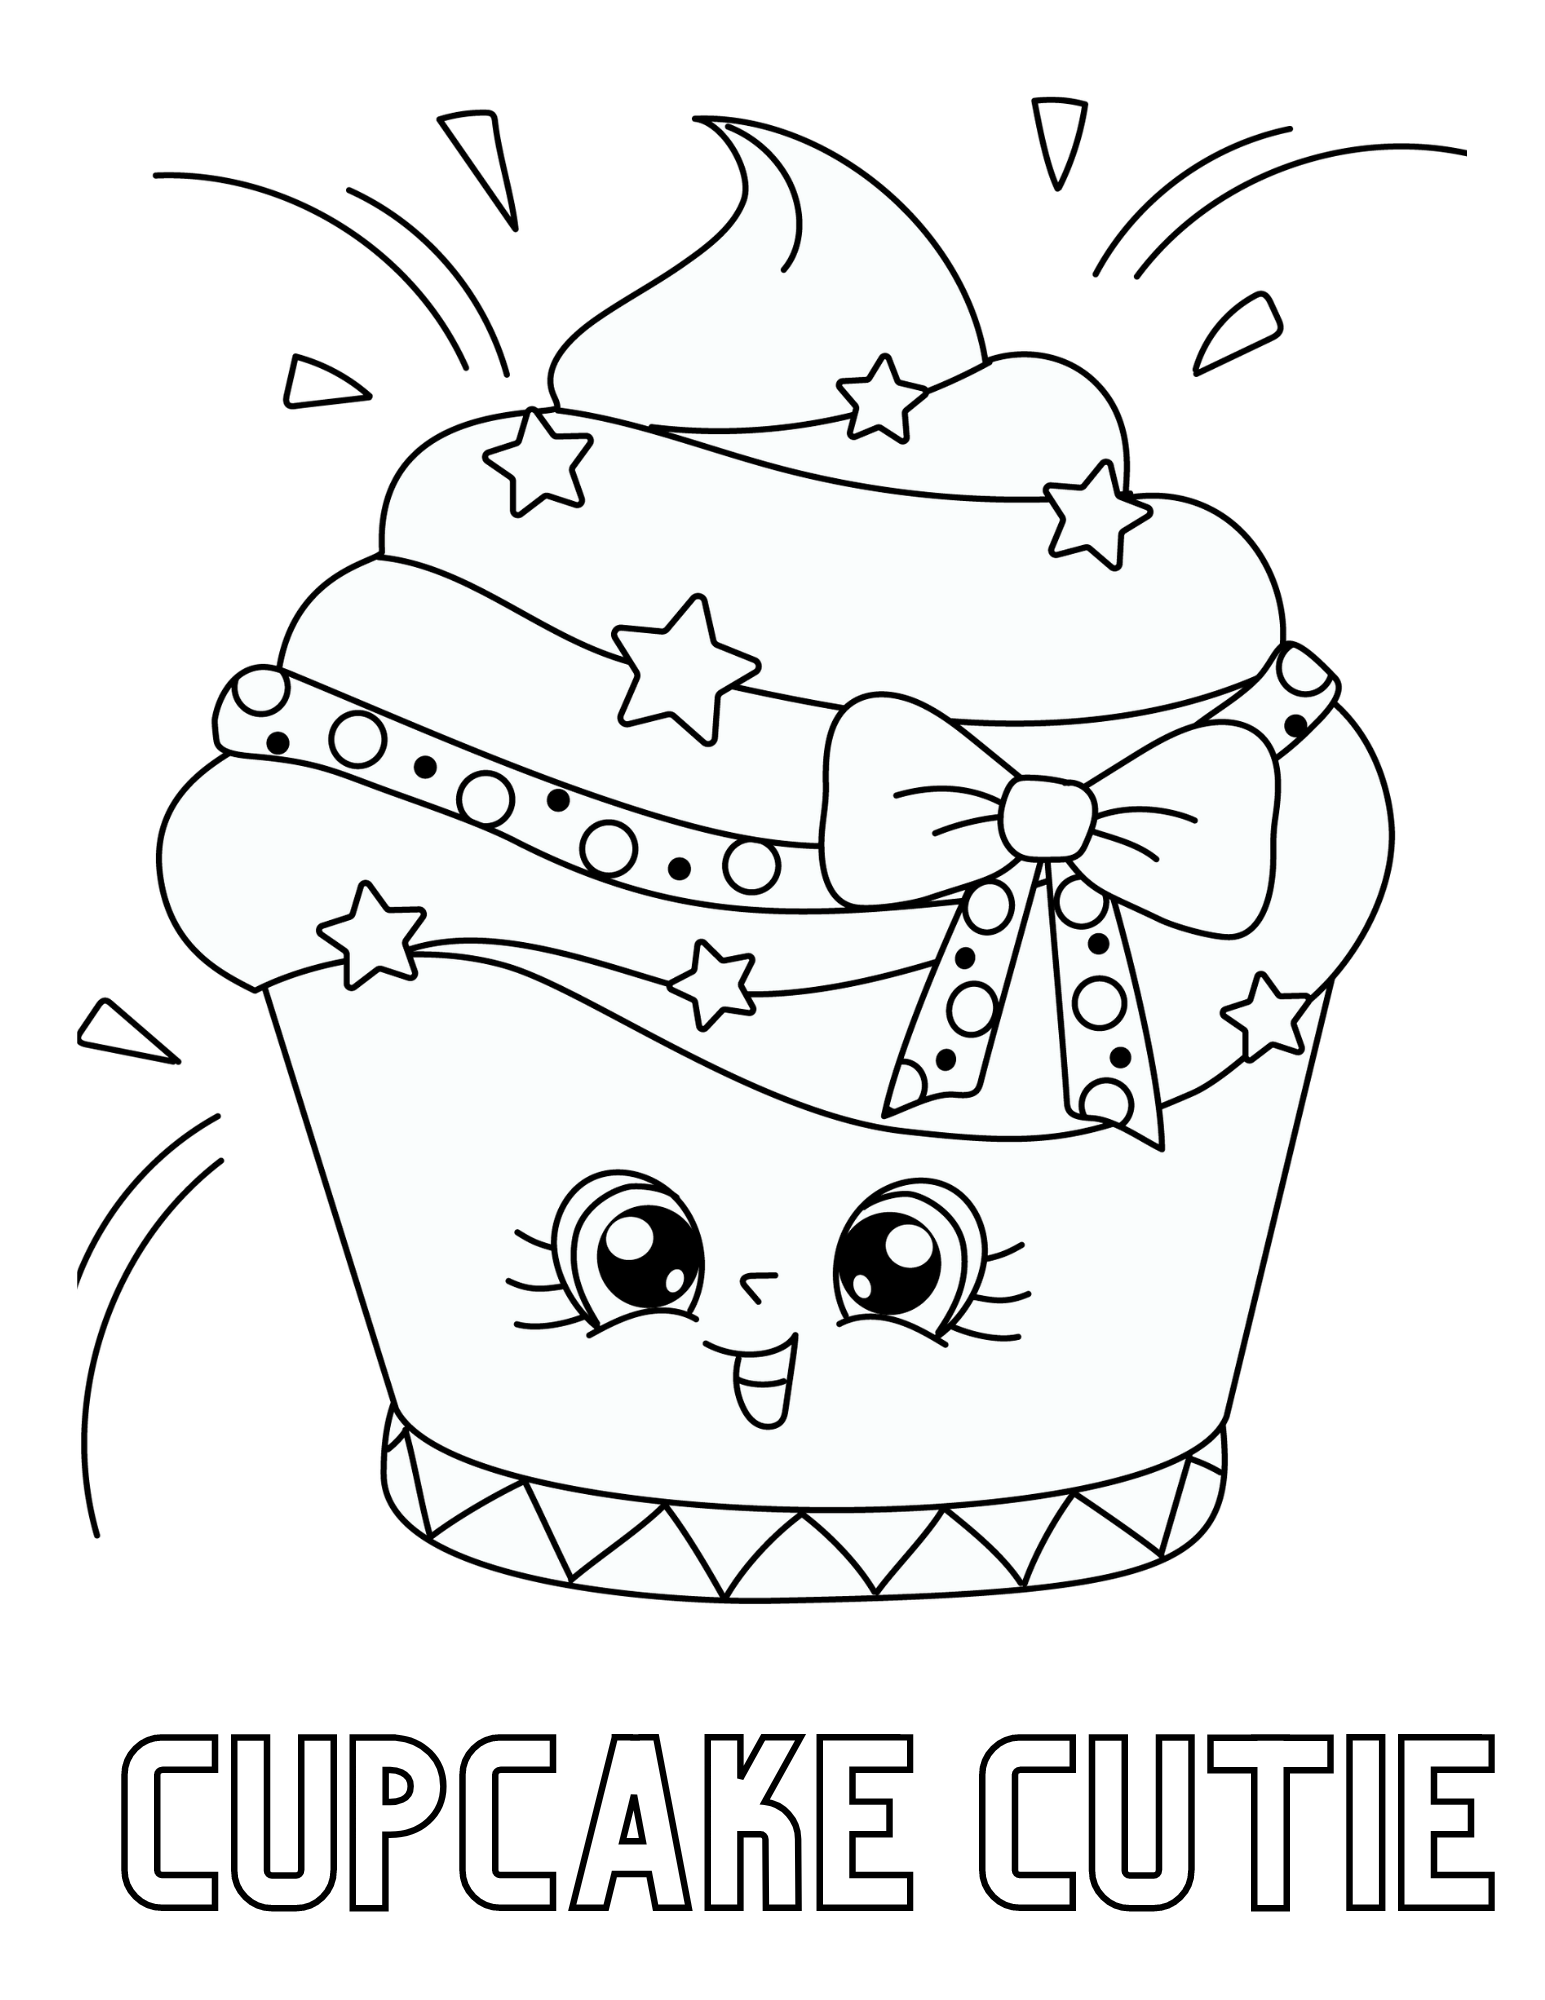 8 Cute Cupcake Coloring Pages